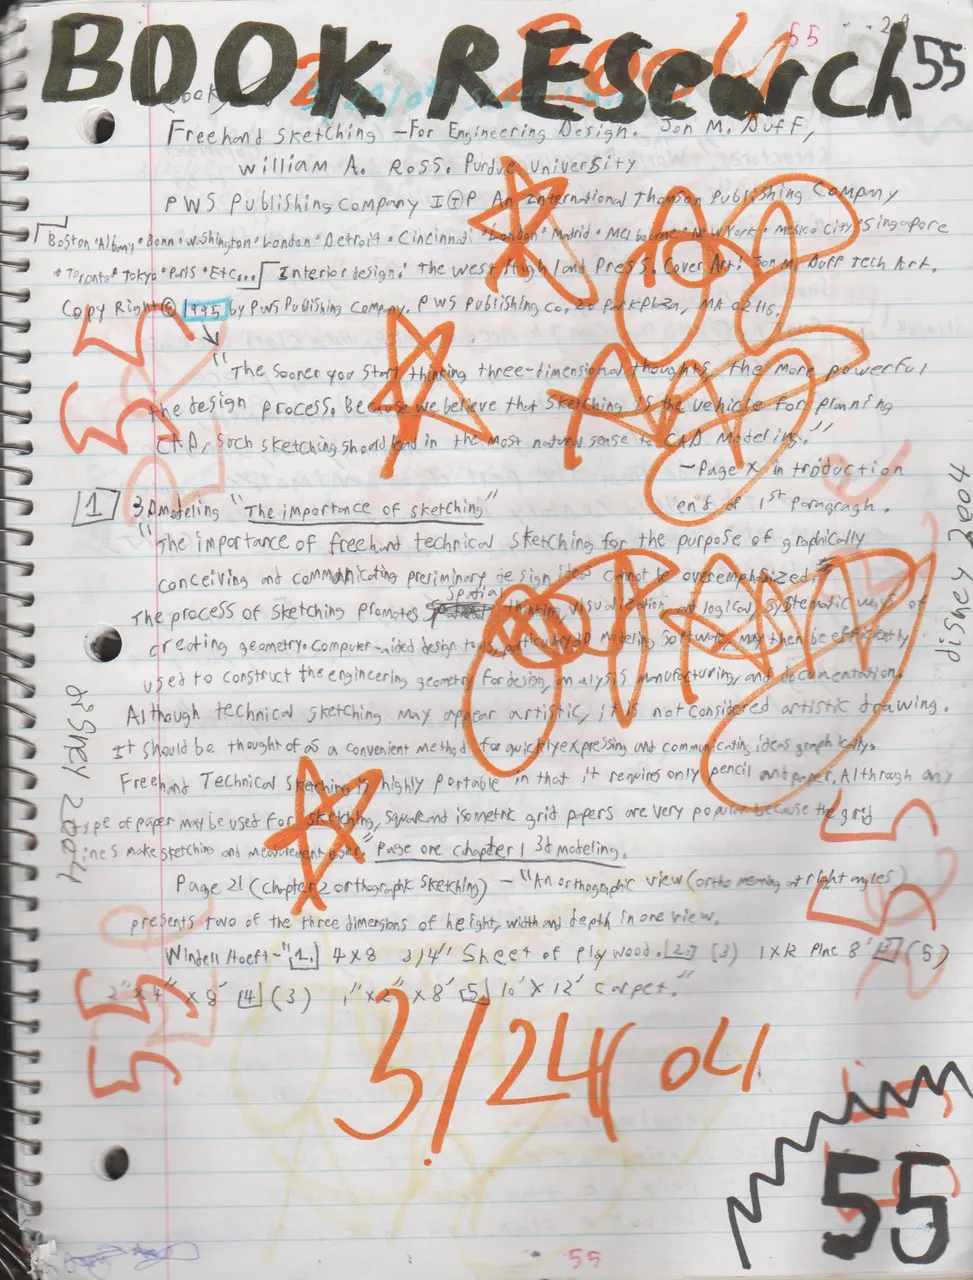 2004-01-29 - Thursday - Carpetball FGHS Senior Project Journal, Joey Arnold, Part 02, 96pages numbered, Notebook-53.png